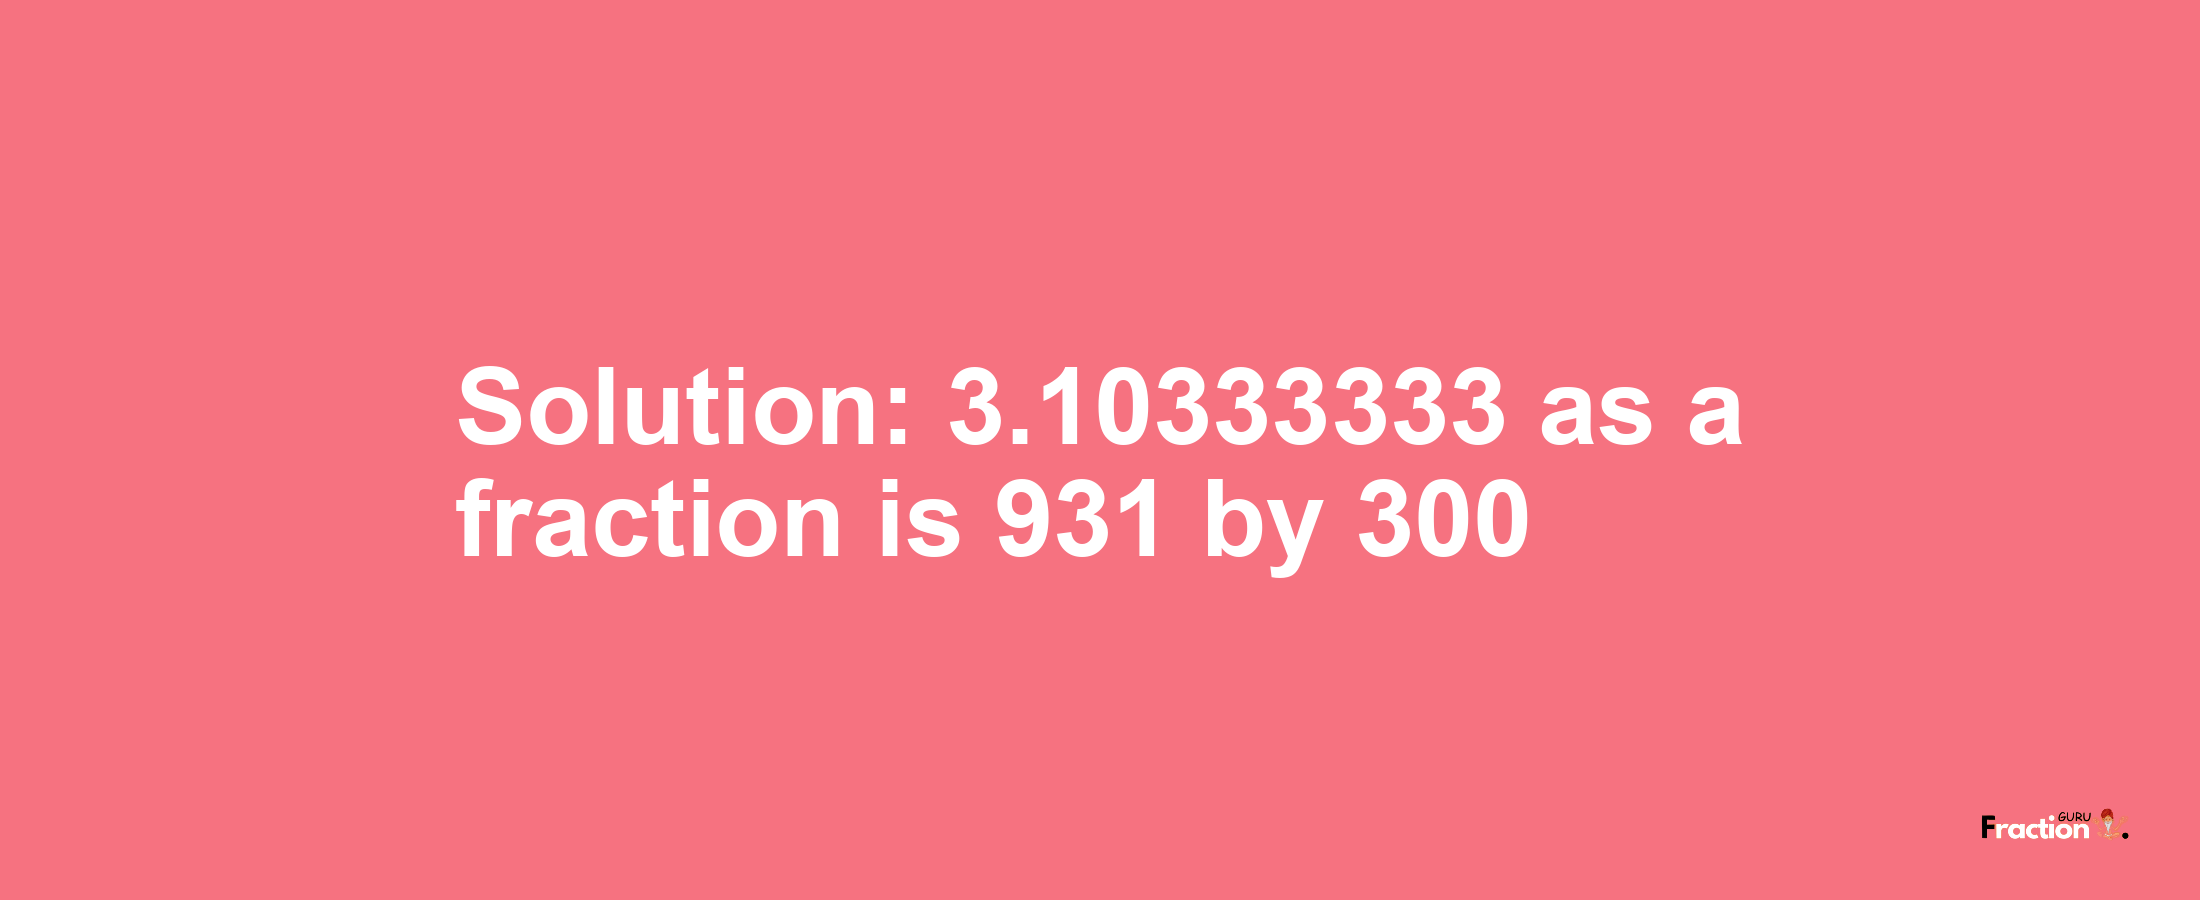 Solution:3.10333333 as a fraction is 931/300